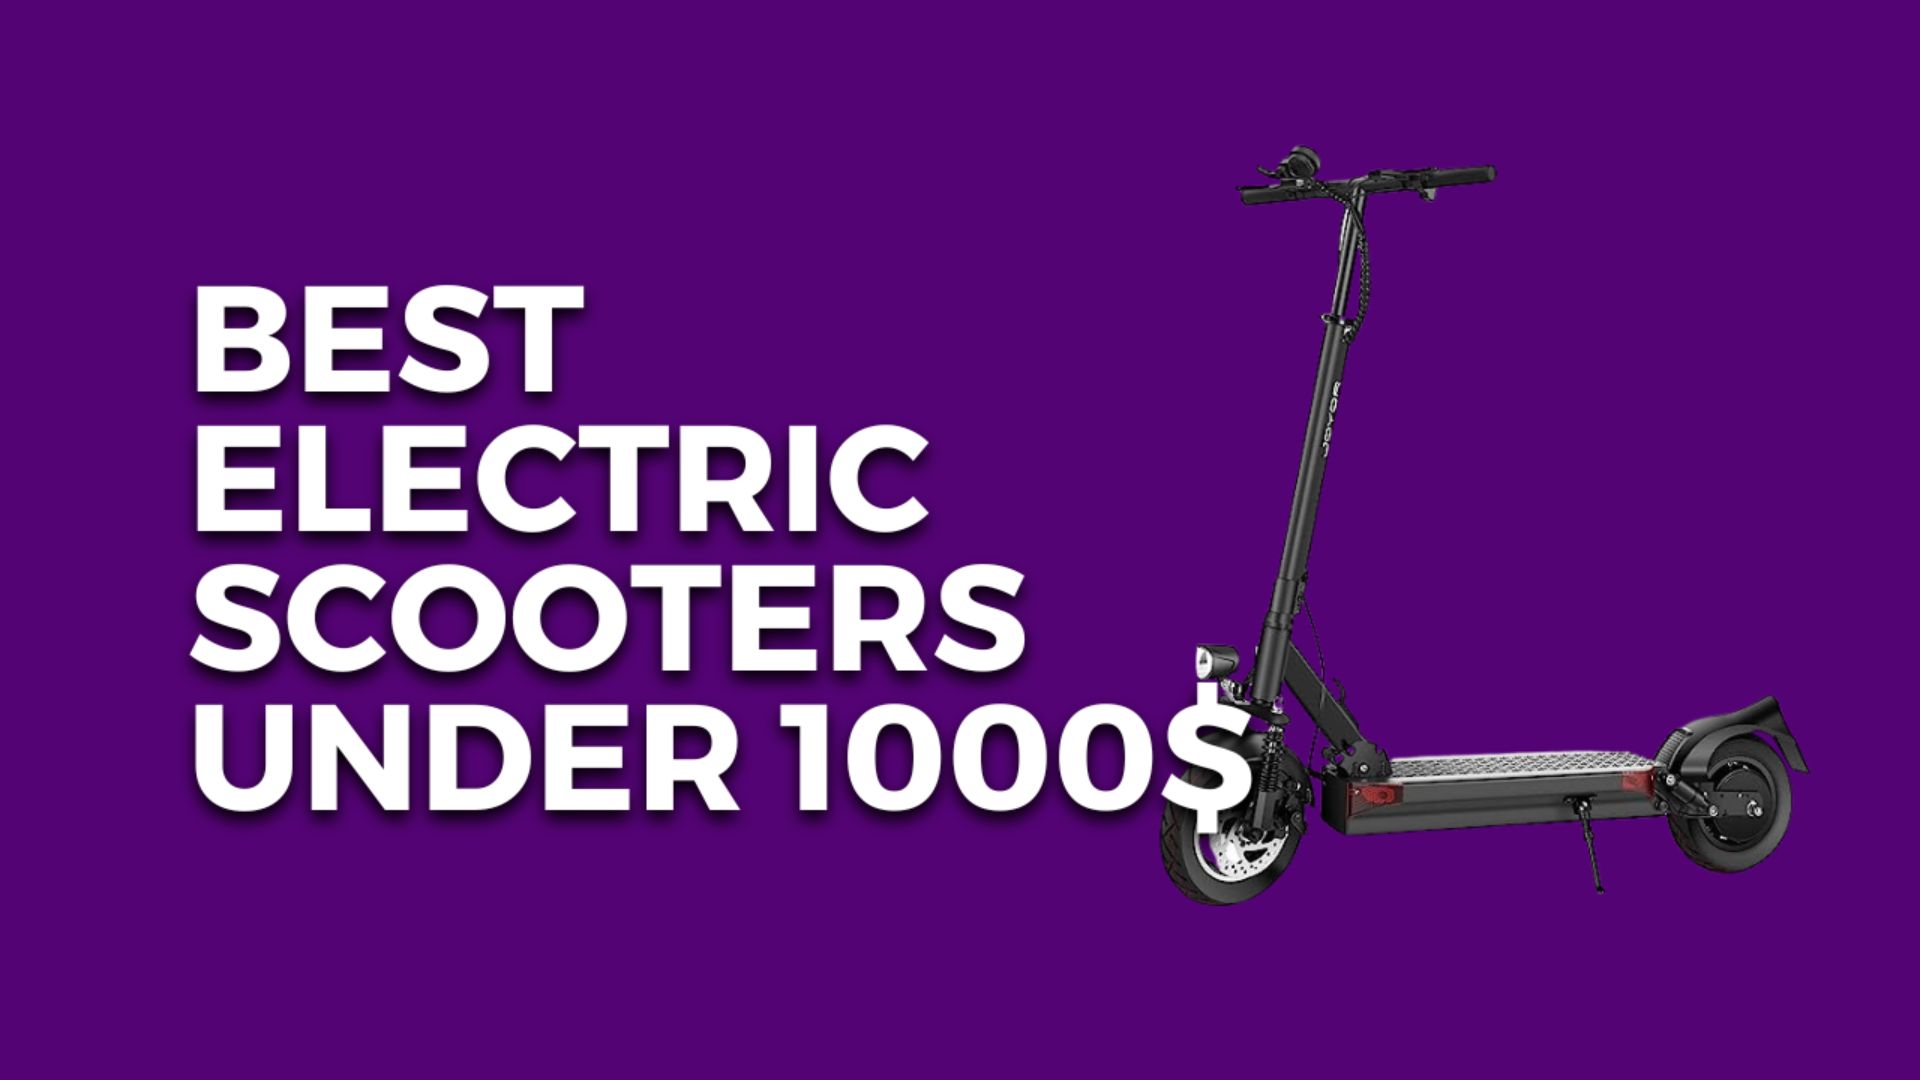 10 Best Electric Scooters Under 1000$